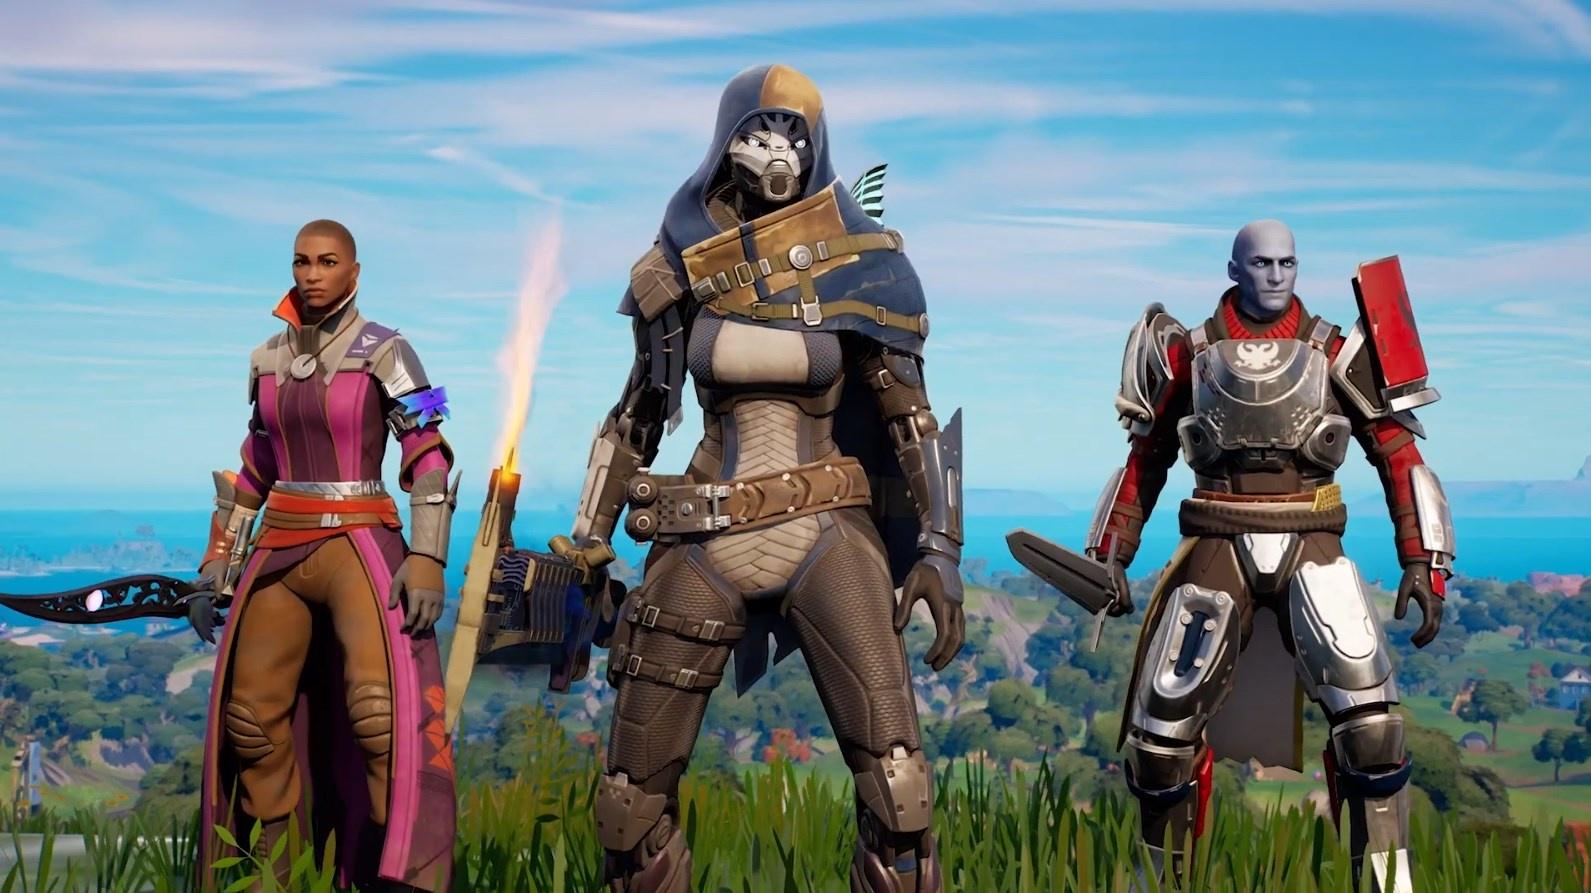 The Destiny 2 Fortnite crossover is real, as the FPS comes to Epic